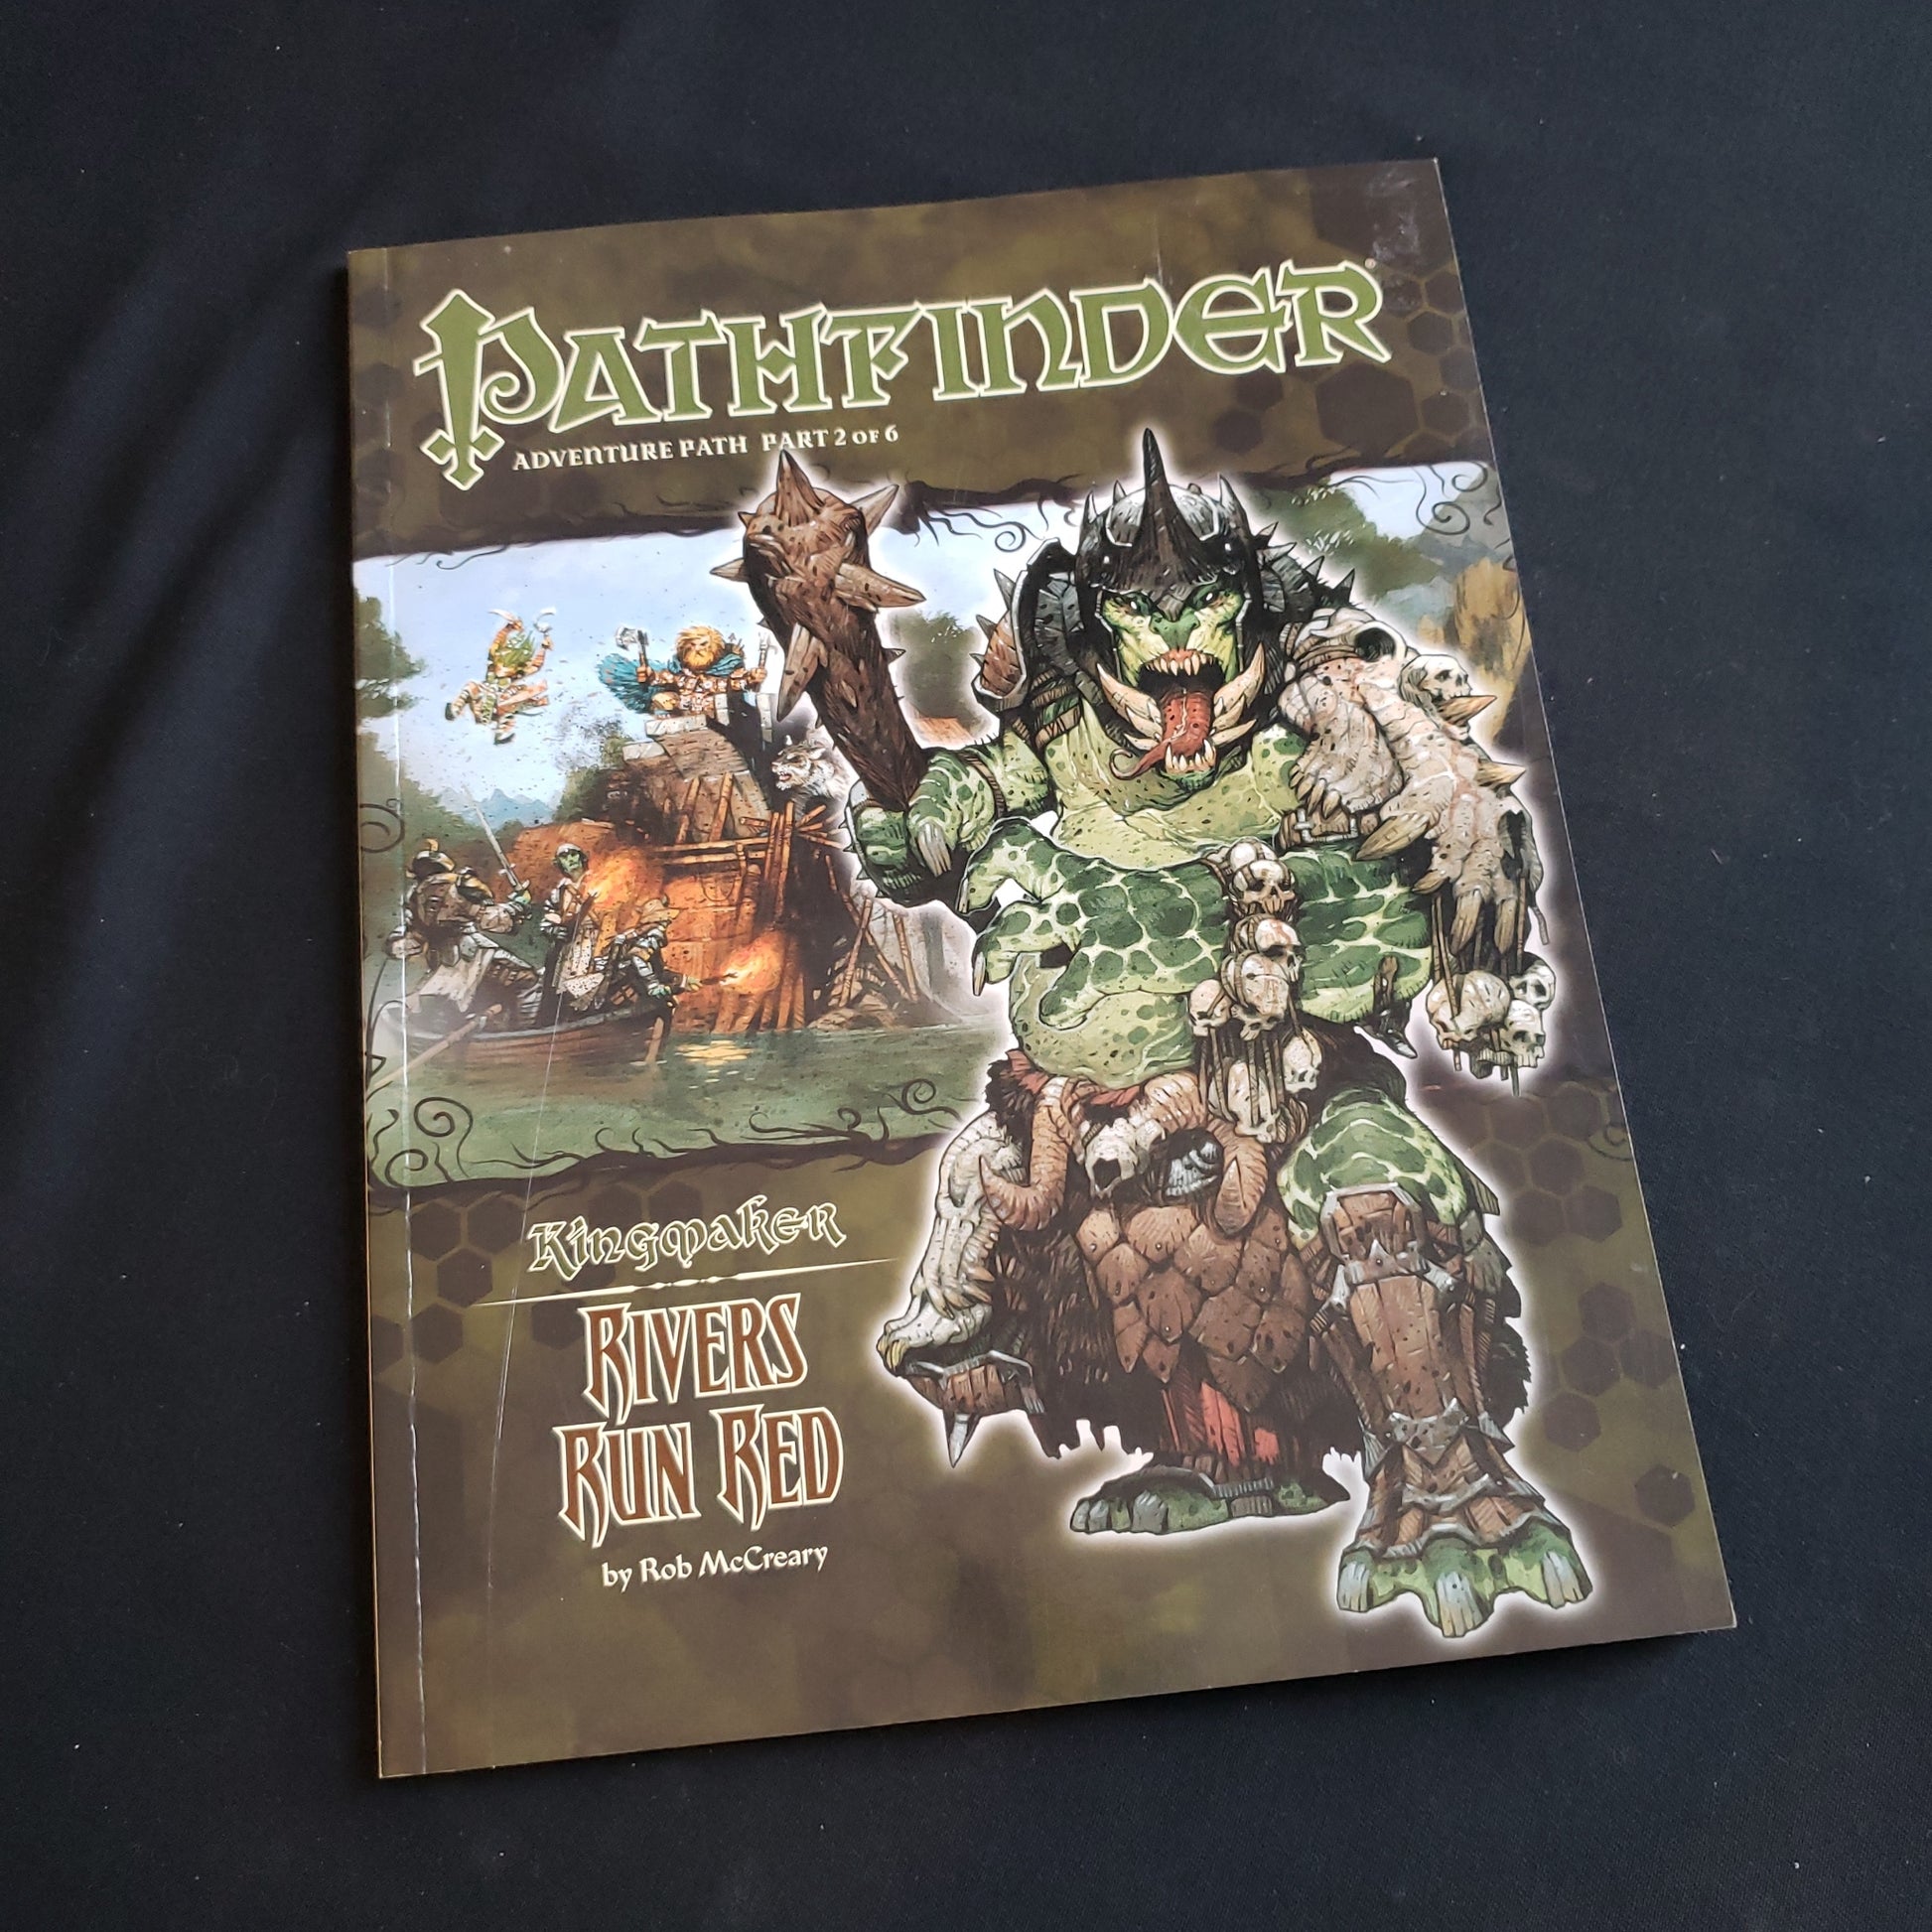 Image shows the front cover of the Rivers Run Red book for the Pathfinder First Edition roleplaying game